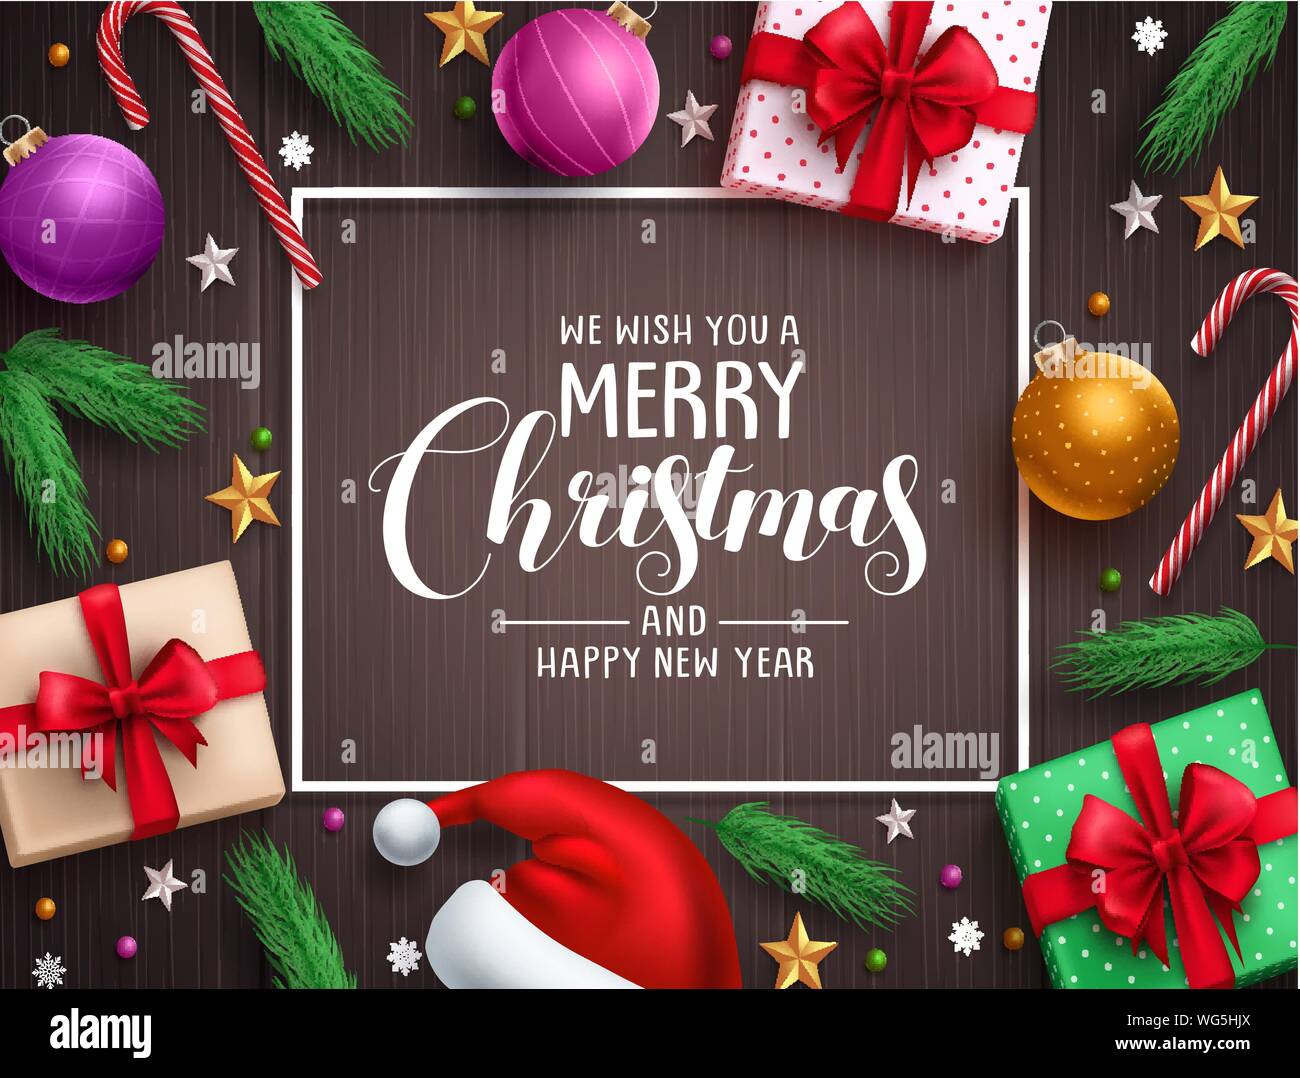 Christmas background vector banner with christmas elements, colorful ...